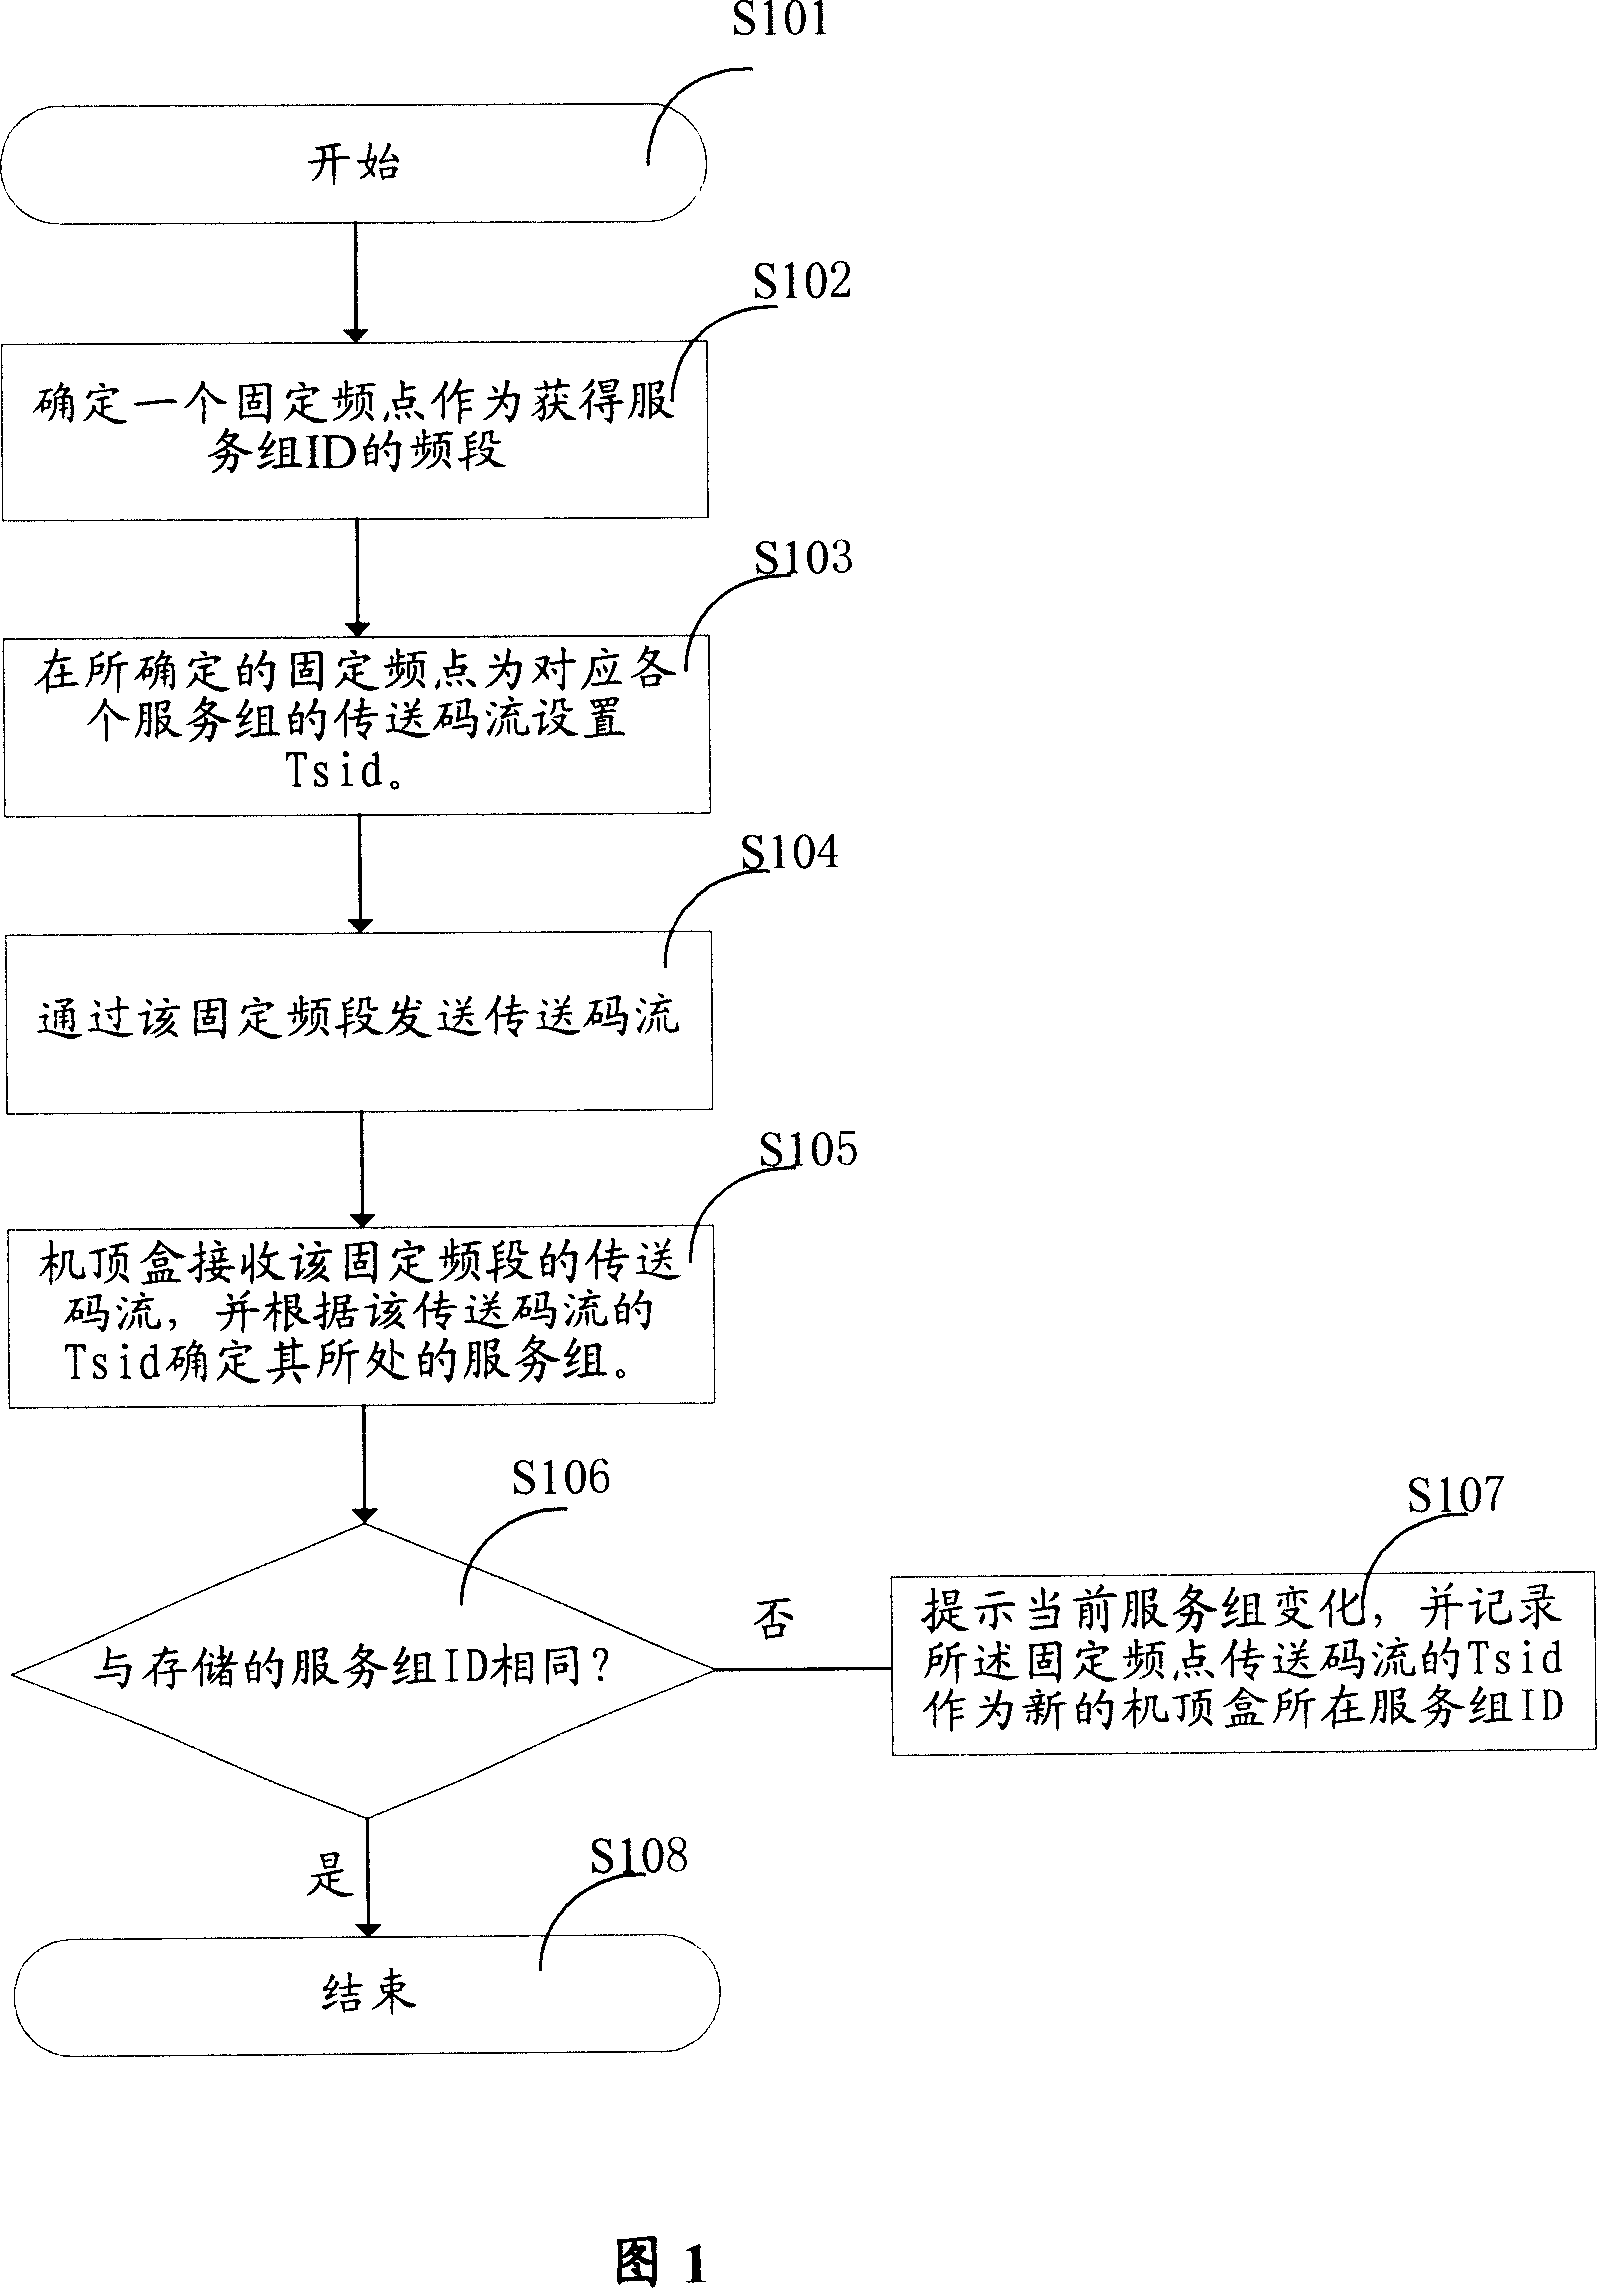 Method for identifying set top box in service group in one-way network video on demand system